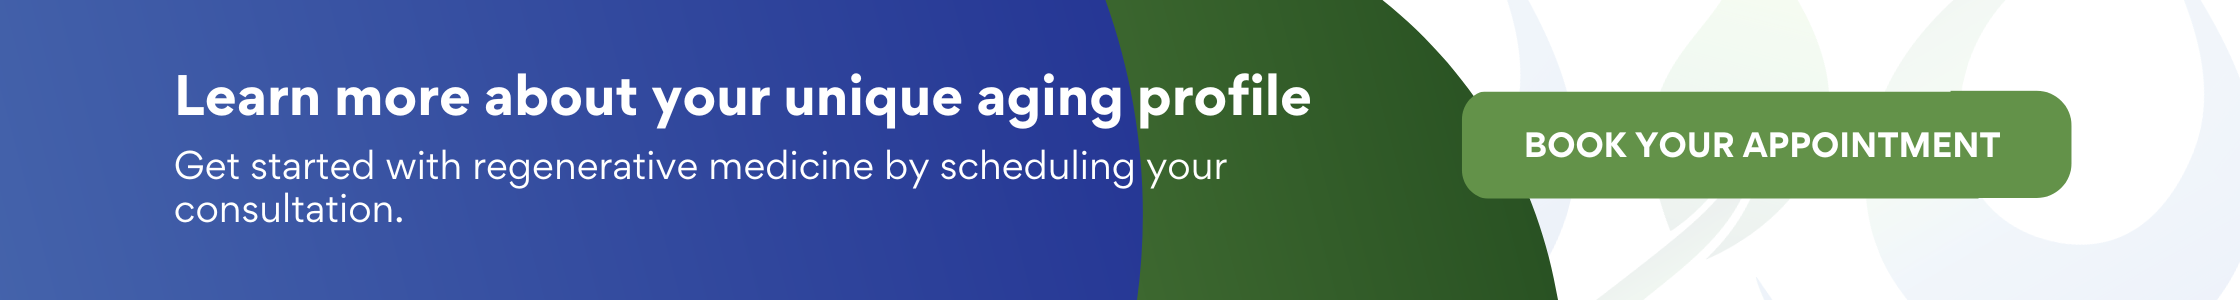 Learn more about your unique aging profile conversion banner